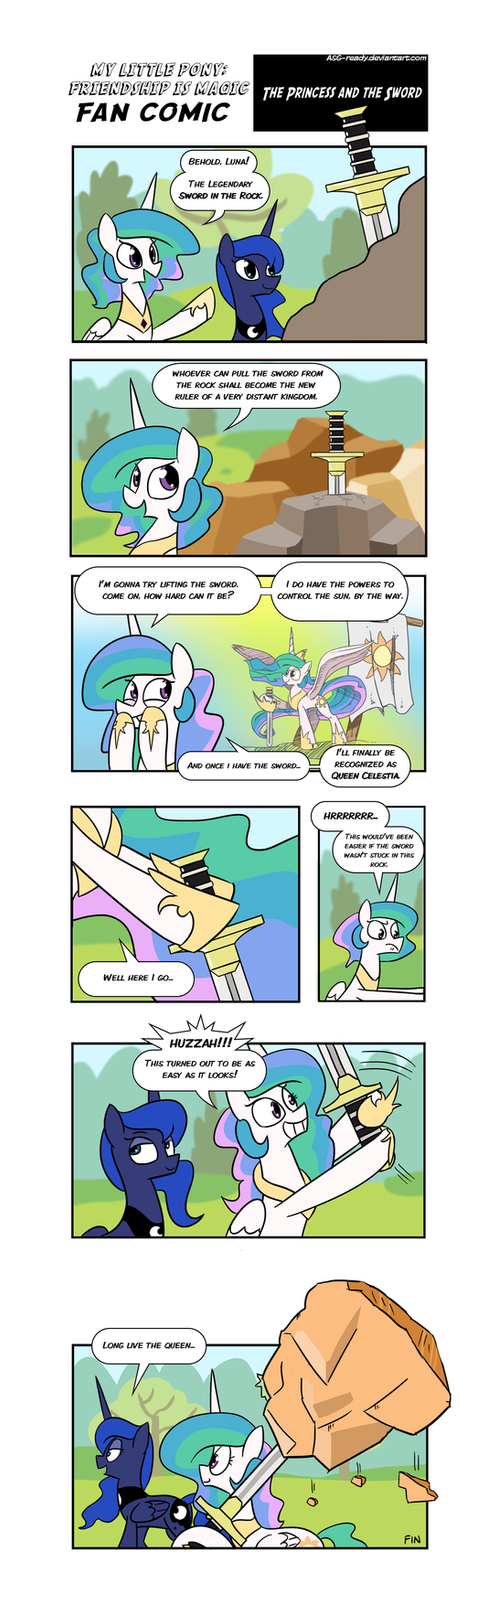 [Obrázek: the_princess_and_the_sword_by_asg_ready-d8w38qy.png]